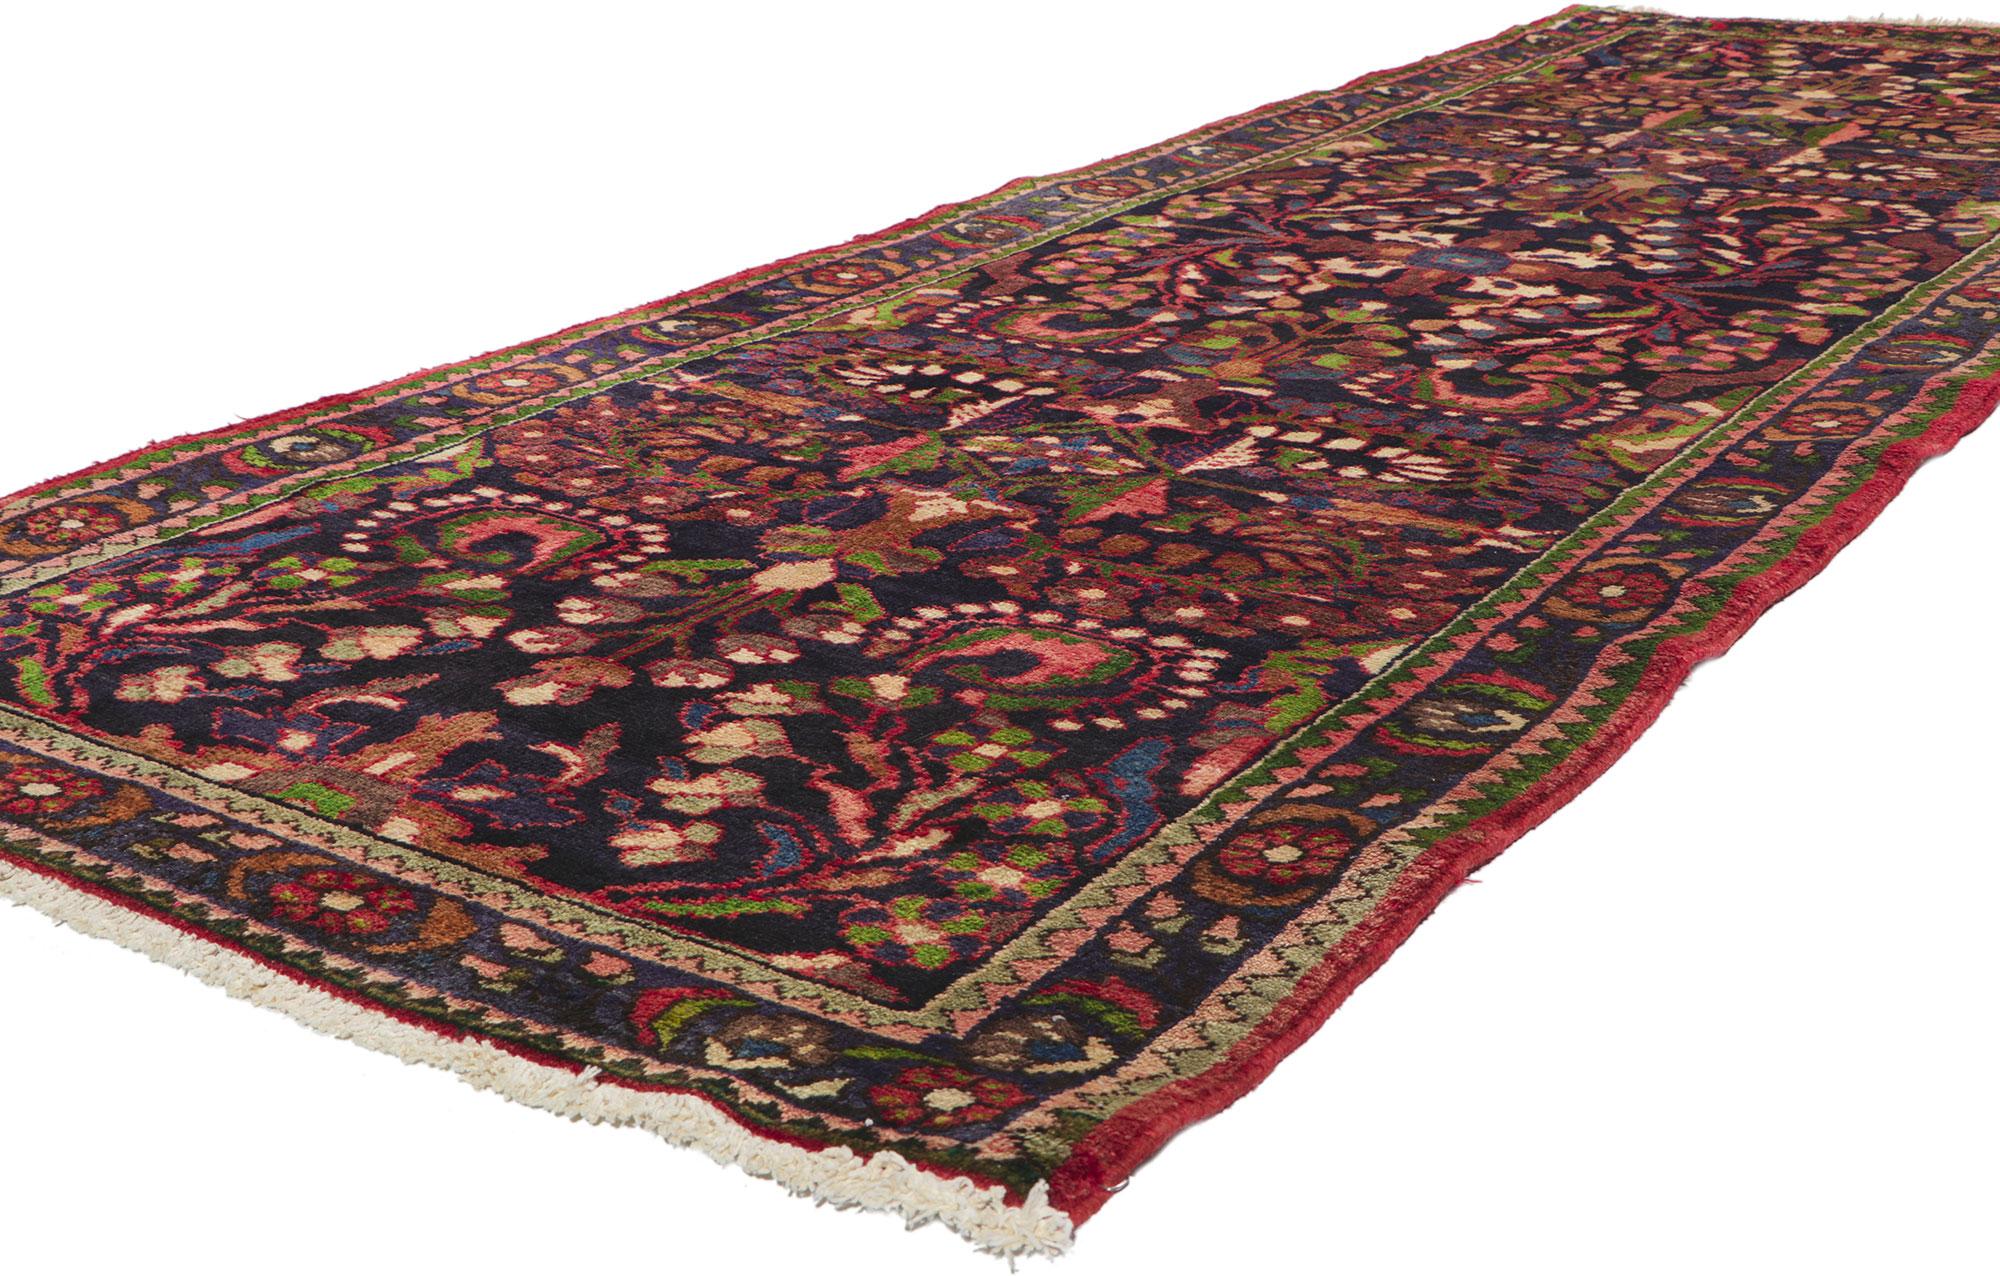 61047 Vintage Persian Malayer Rug, 03'08 x 10'00. Enter the captivating realm of this meticulously hand-knotted wool antique Persian Malayer rug—a masterful fusion of enduring floral design and a rich, traditional color spectrum. The midnight-hued